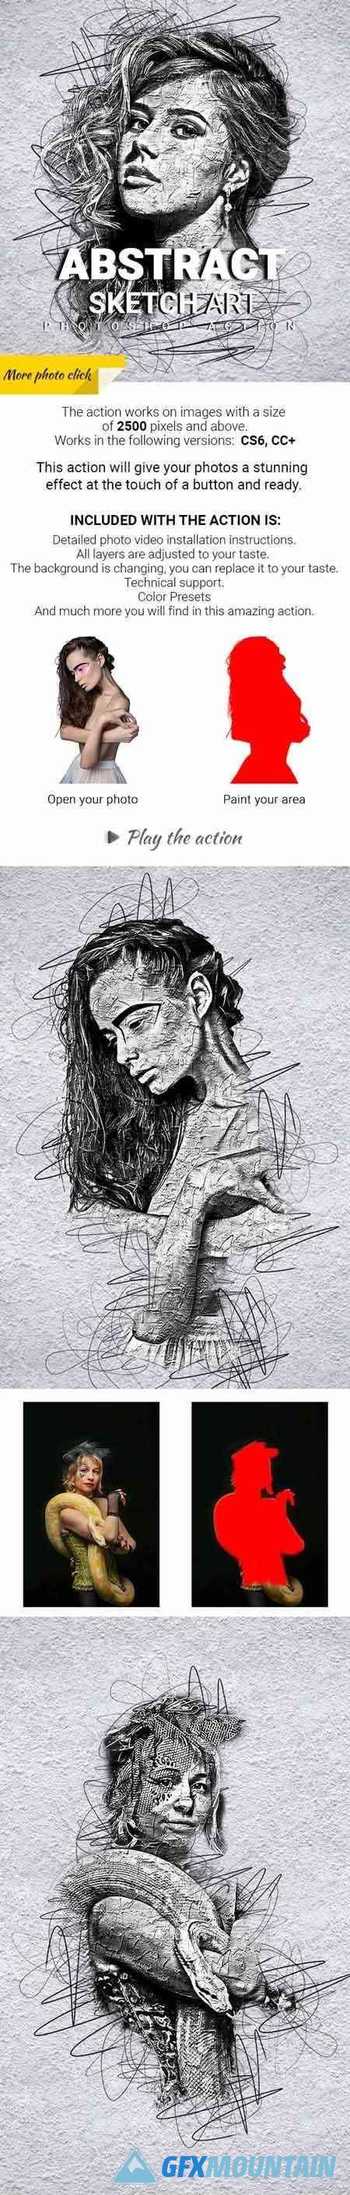 Abstract Sketch Art Photoshop Action 29913460